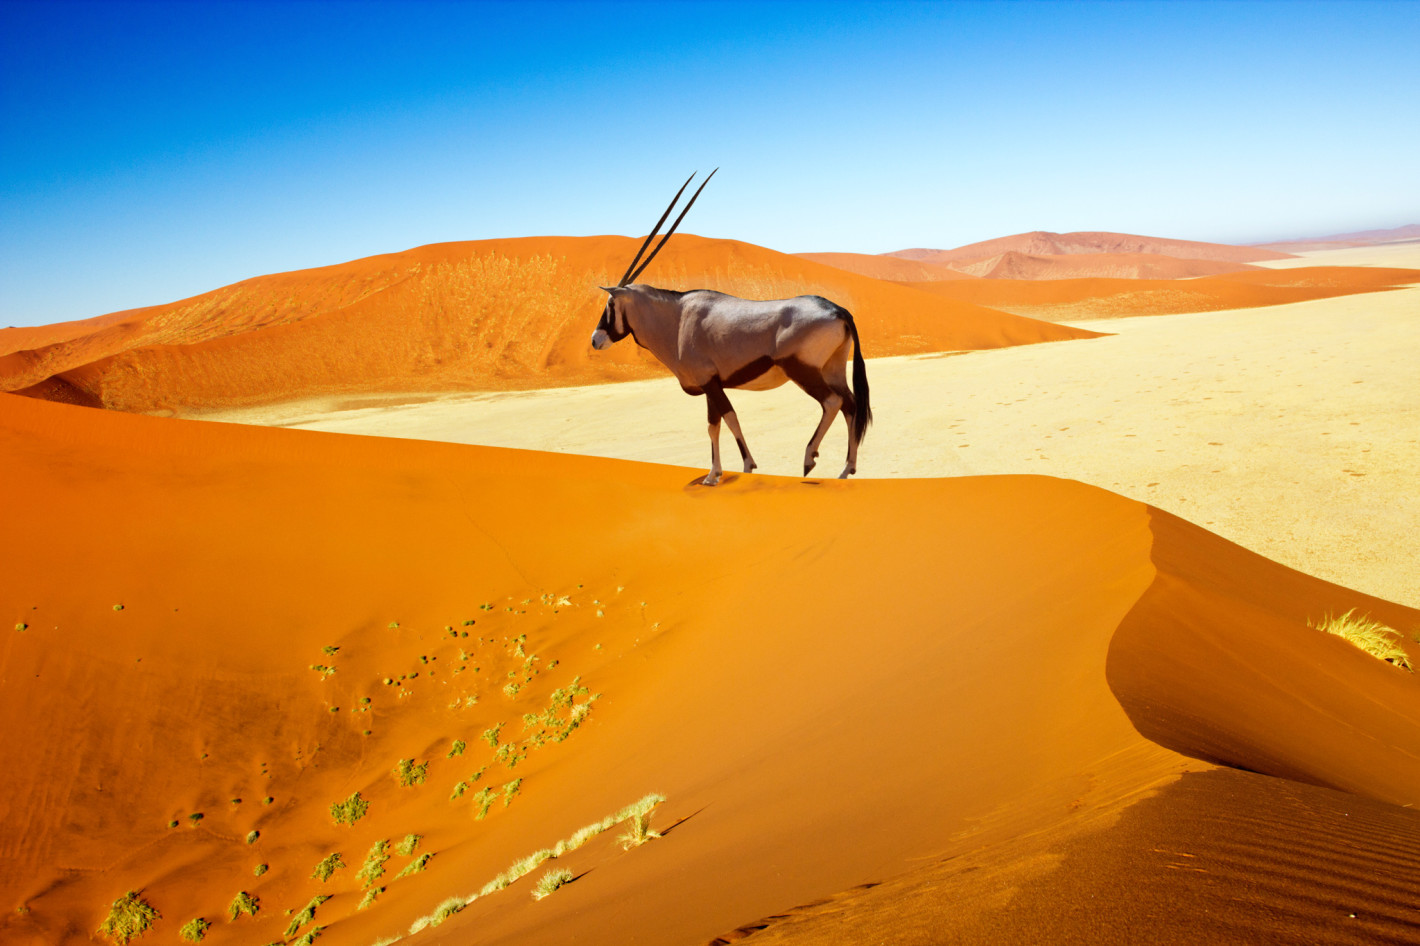 Lone_Oryx_Standing_On_Dune_Namibia